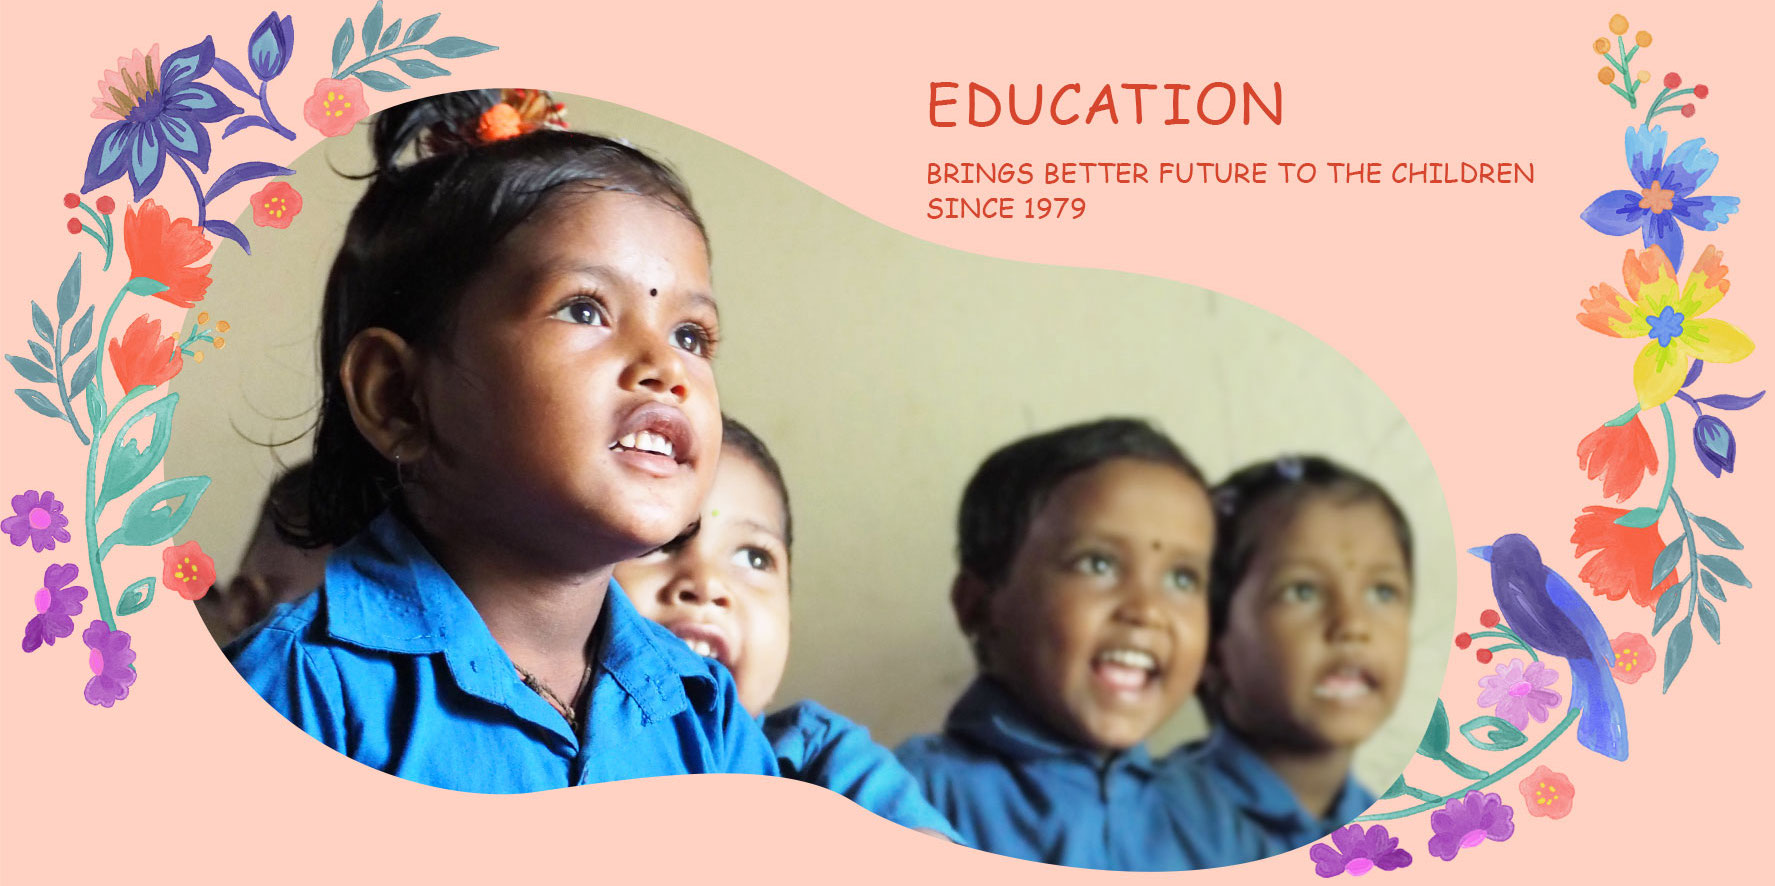 EDUCATION BRINGS BETTER FUTURE TO THE CHILDREN SINCE 1979